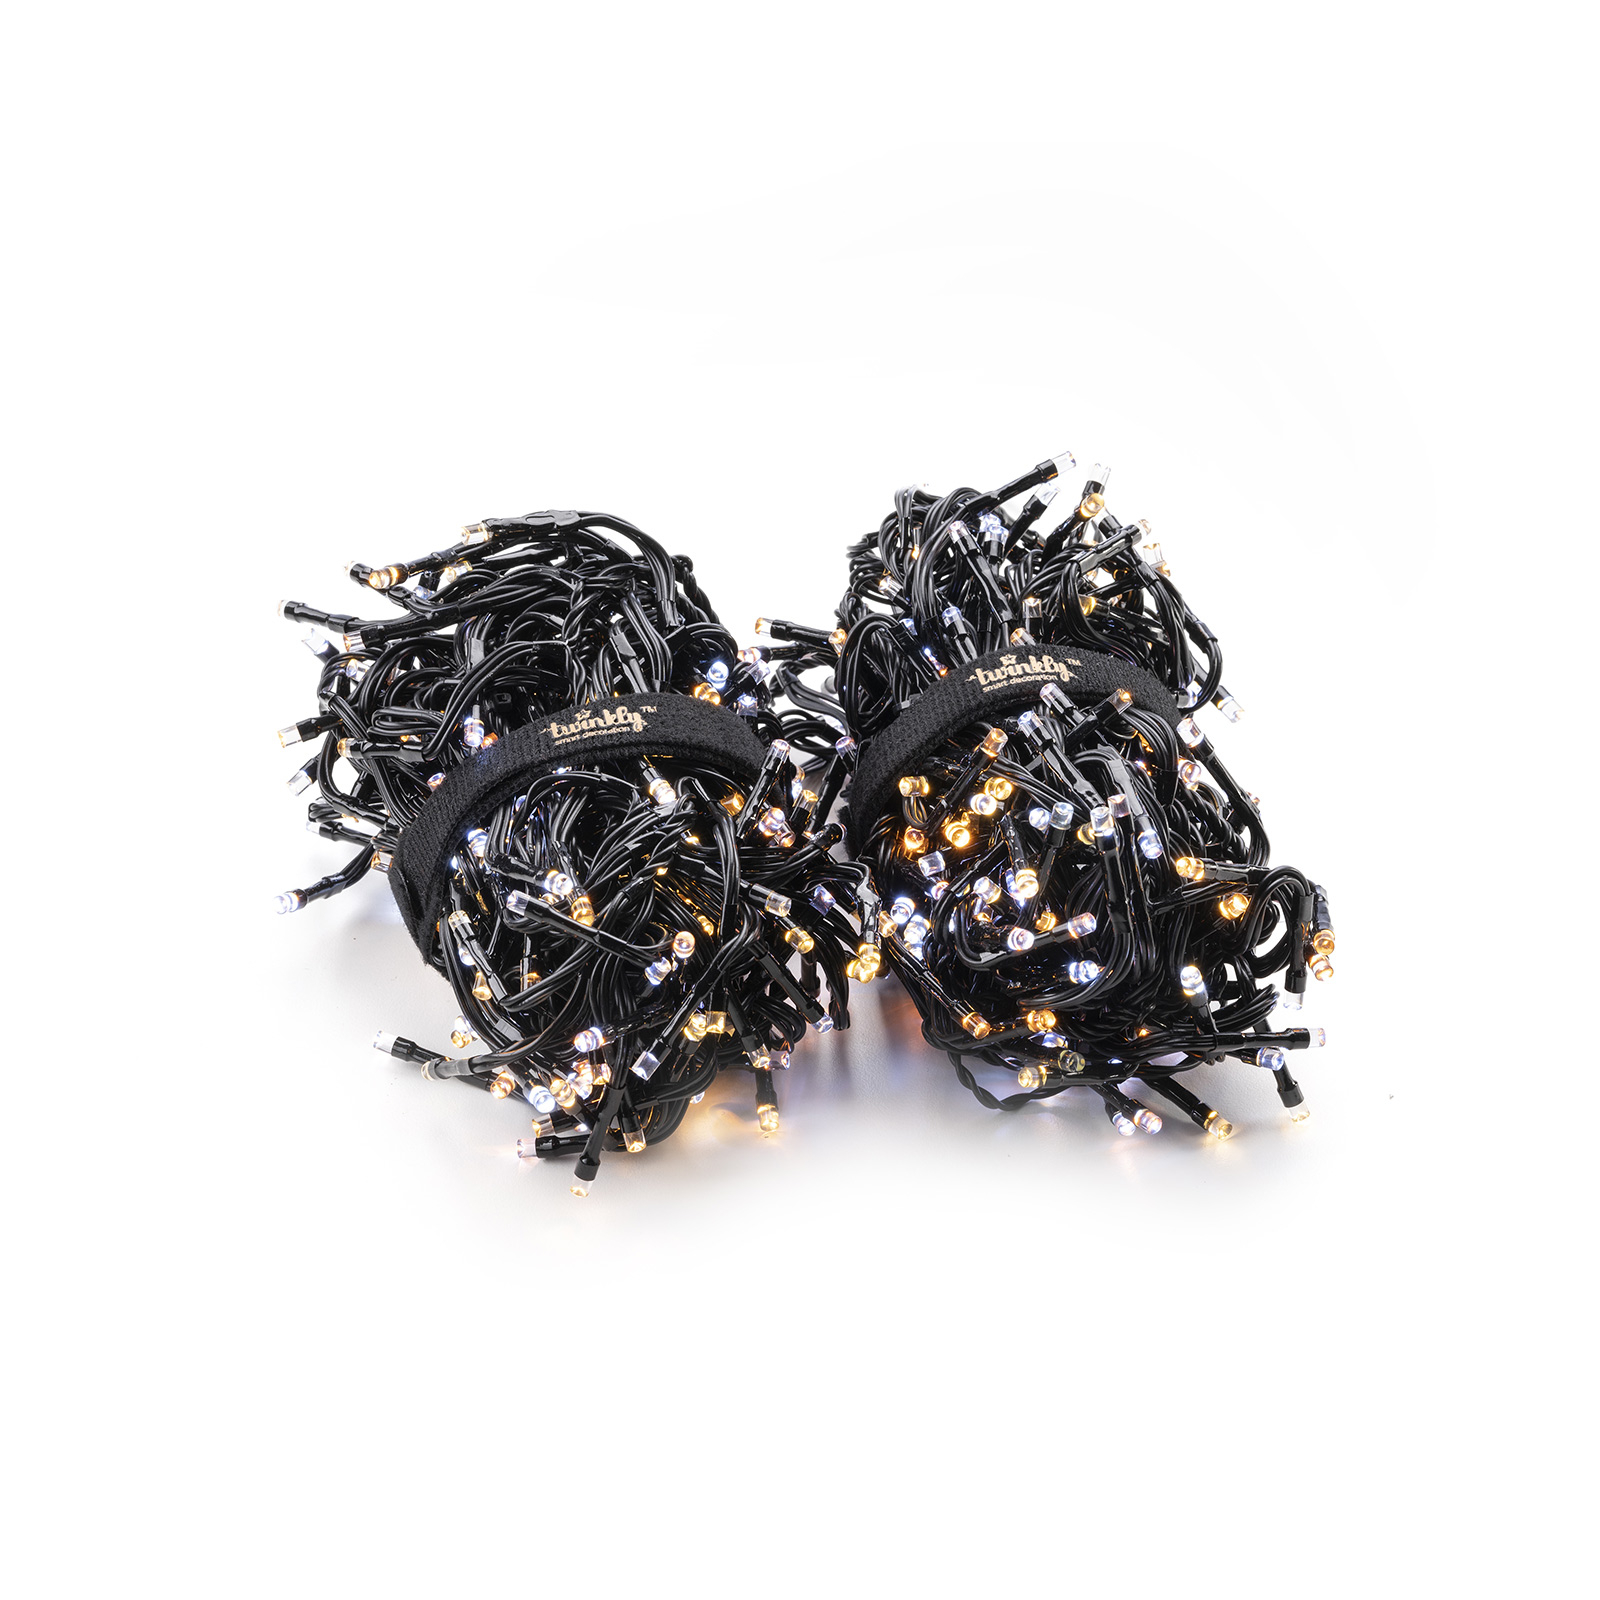 Twinkly Cluster fairy lights CCT black 400-bulb 6m